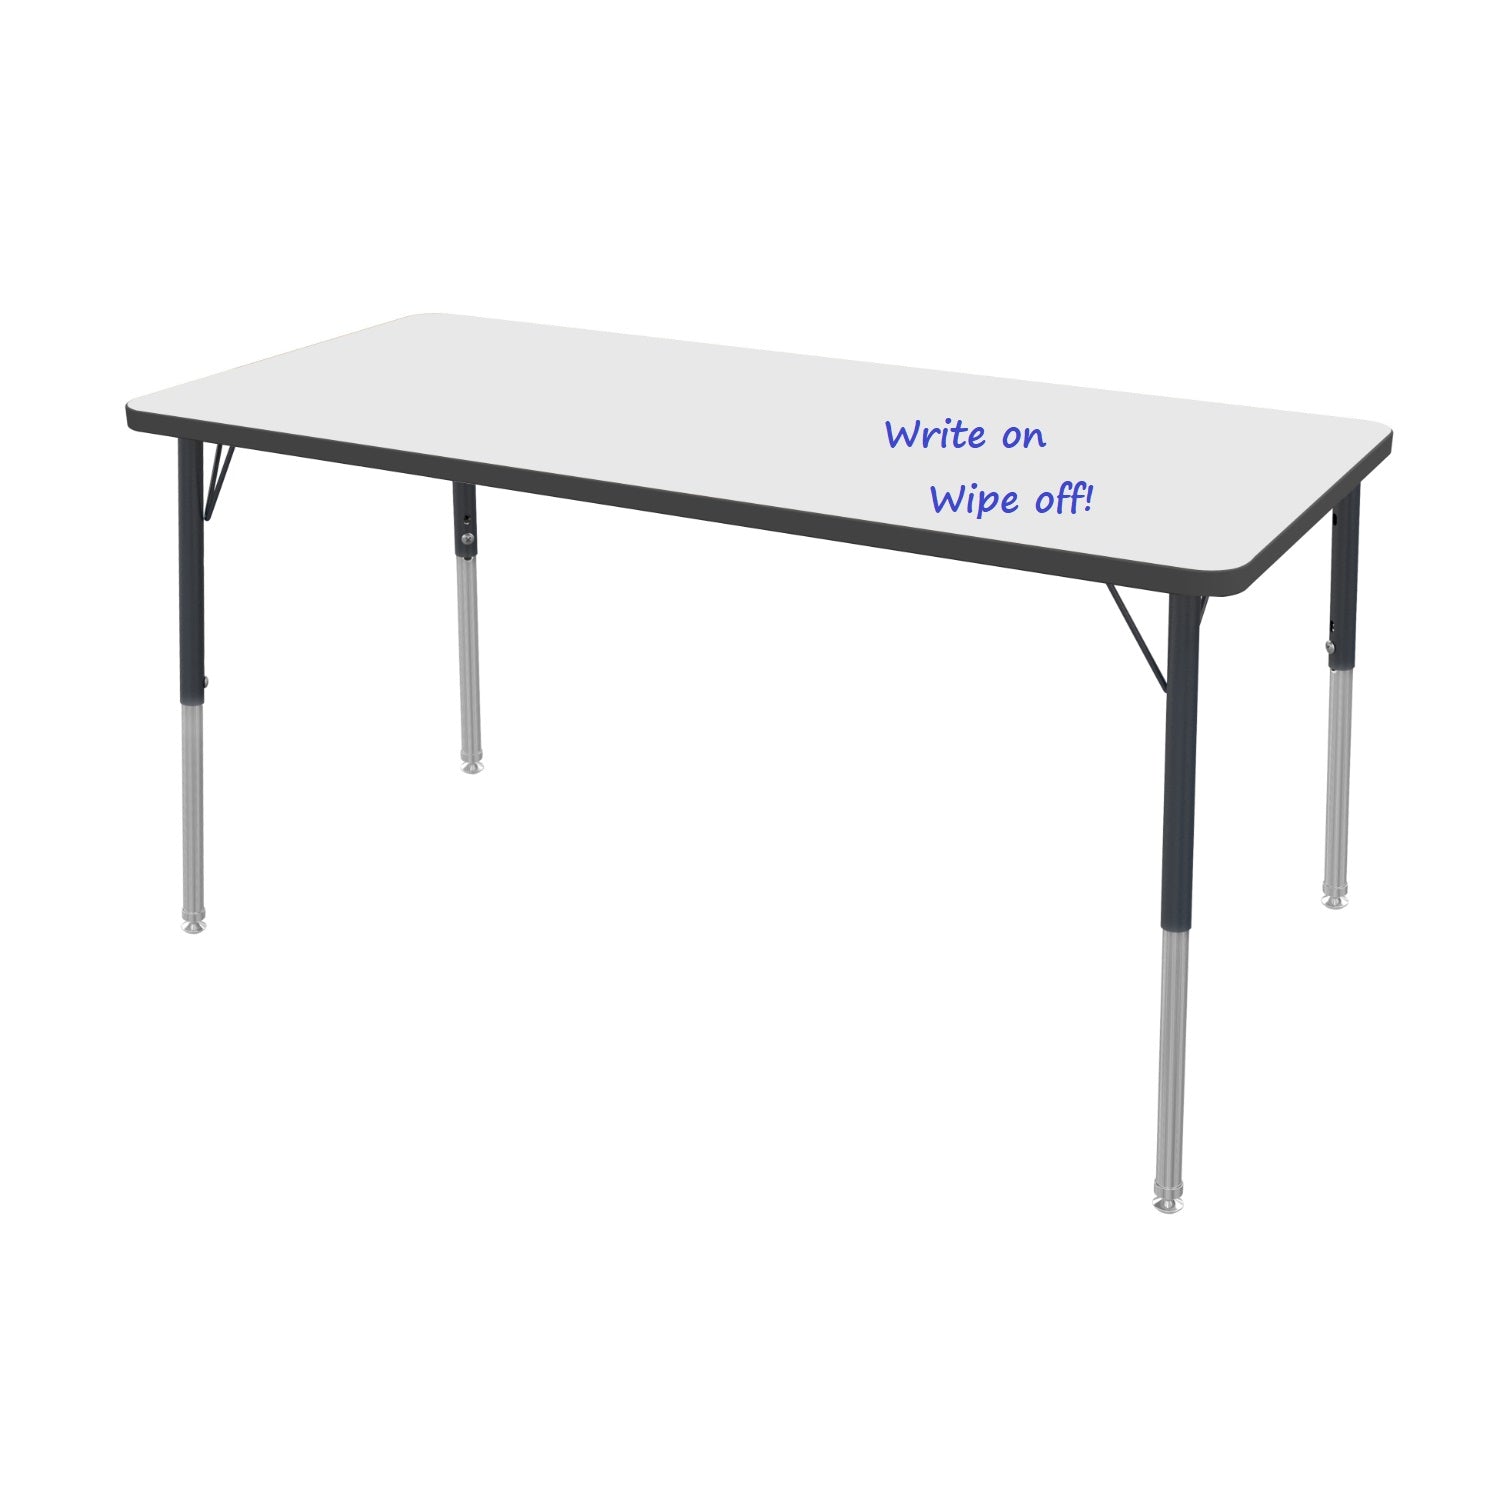 MG Series Adjustable Height Activity Table with White Dry Erase Markerboard Top, 30" x 72" Rectangle